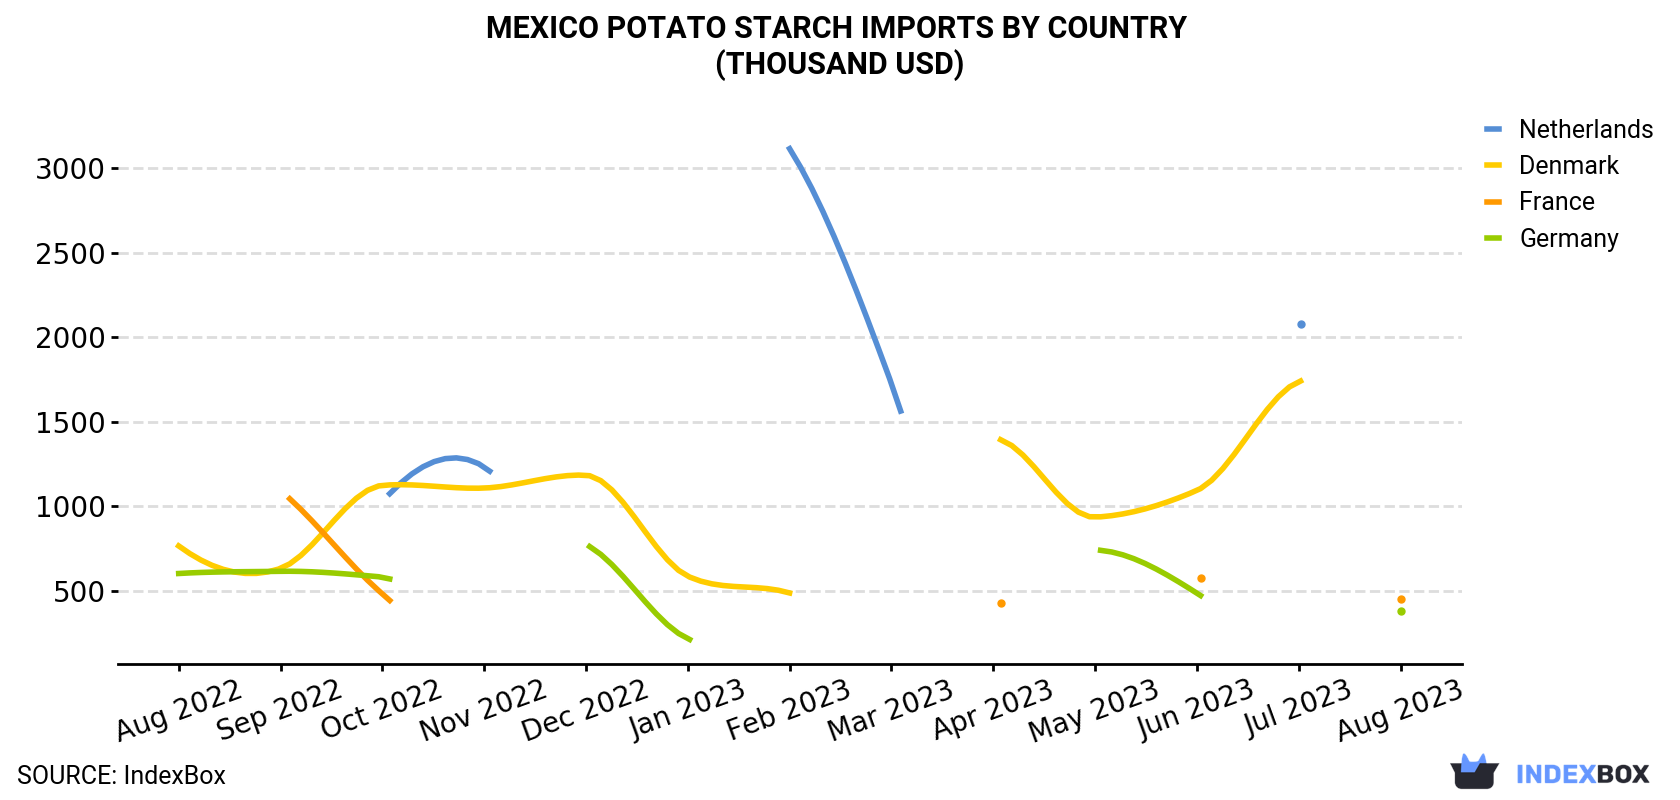 Mexico Potato Starch Imports By Country (Thousand USD)